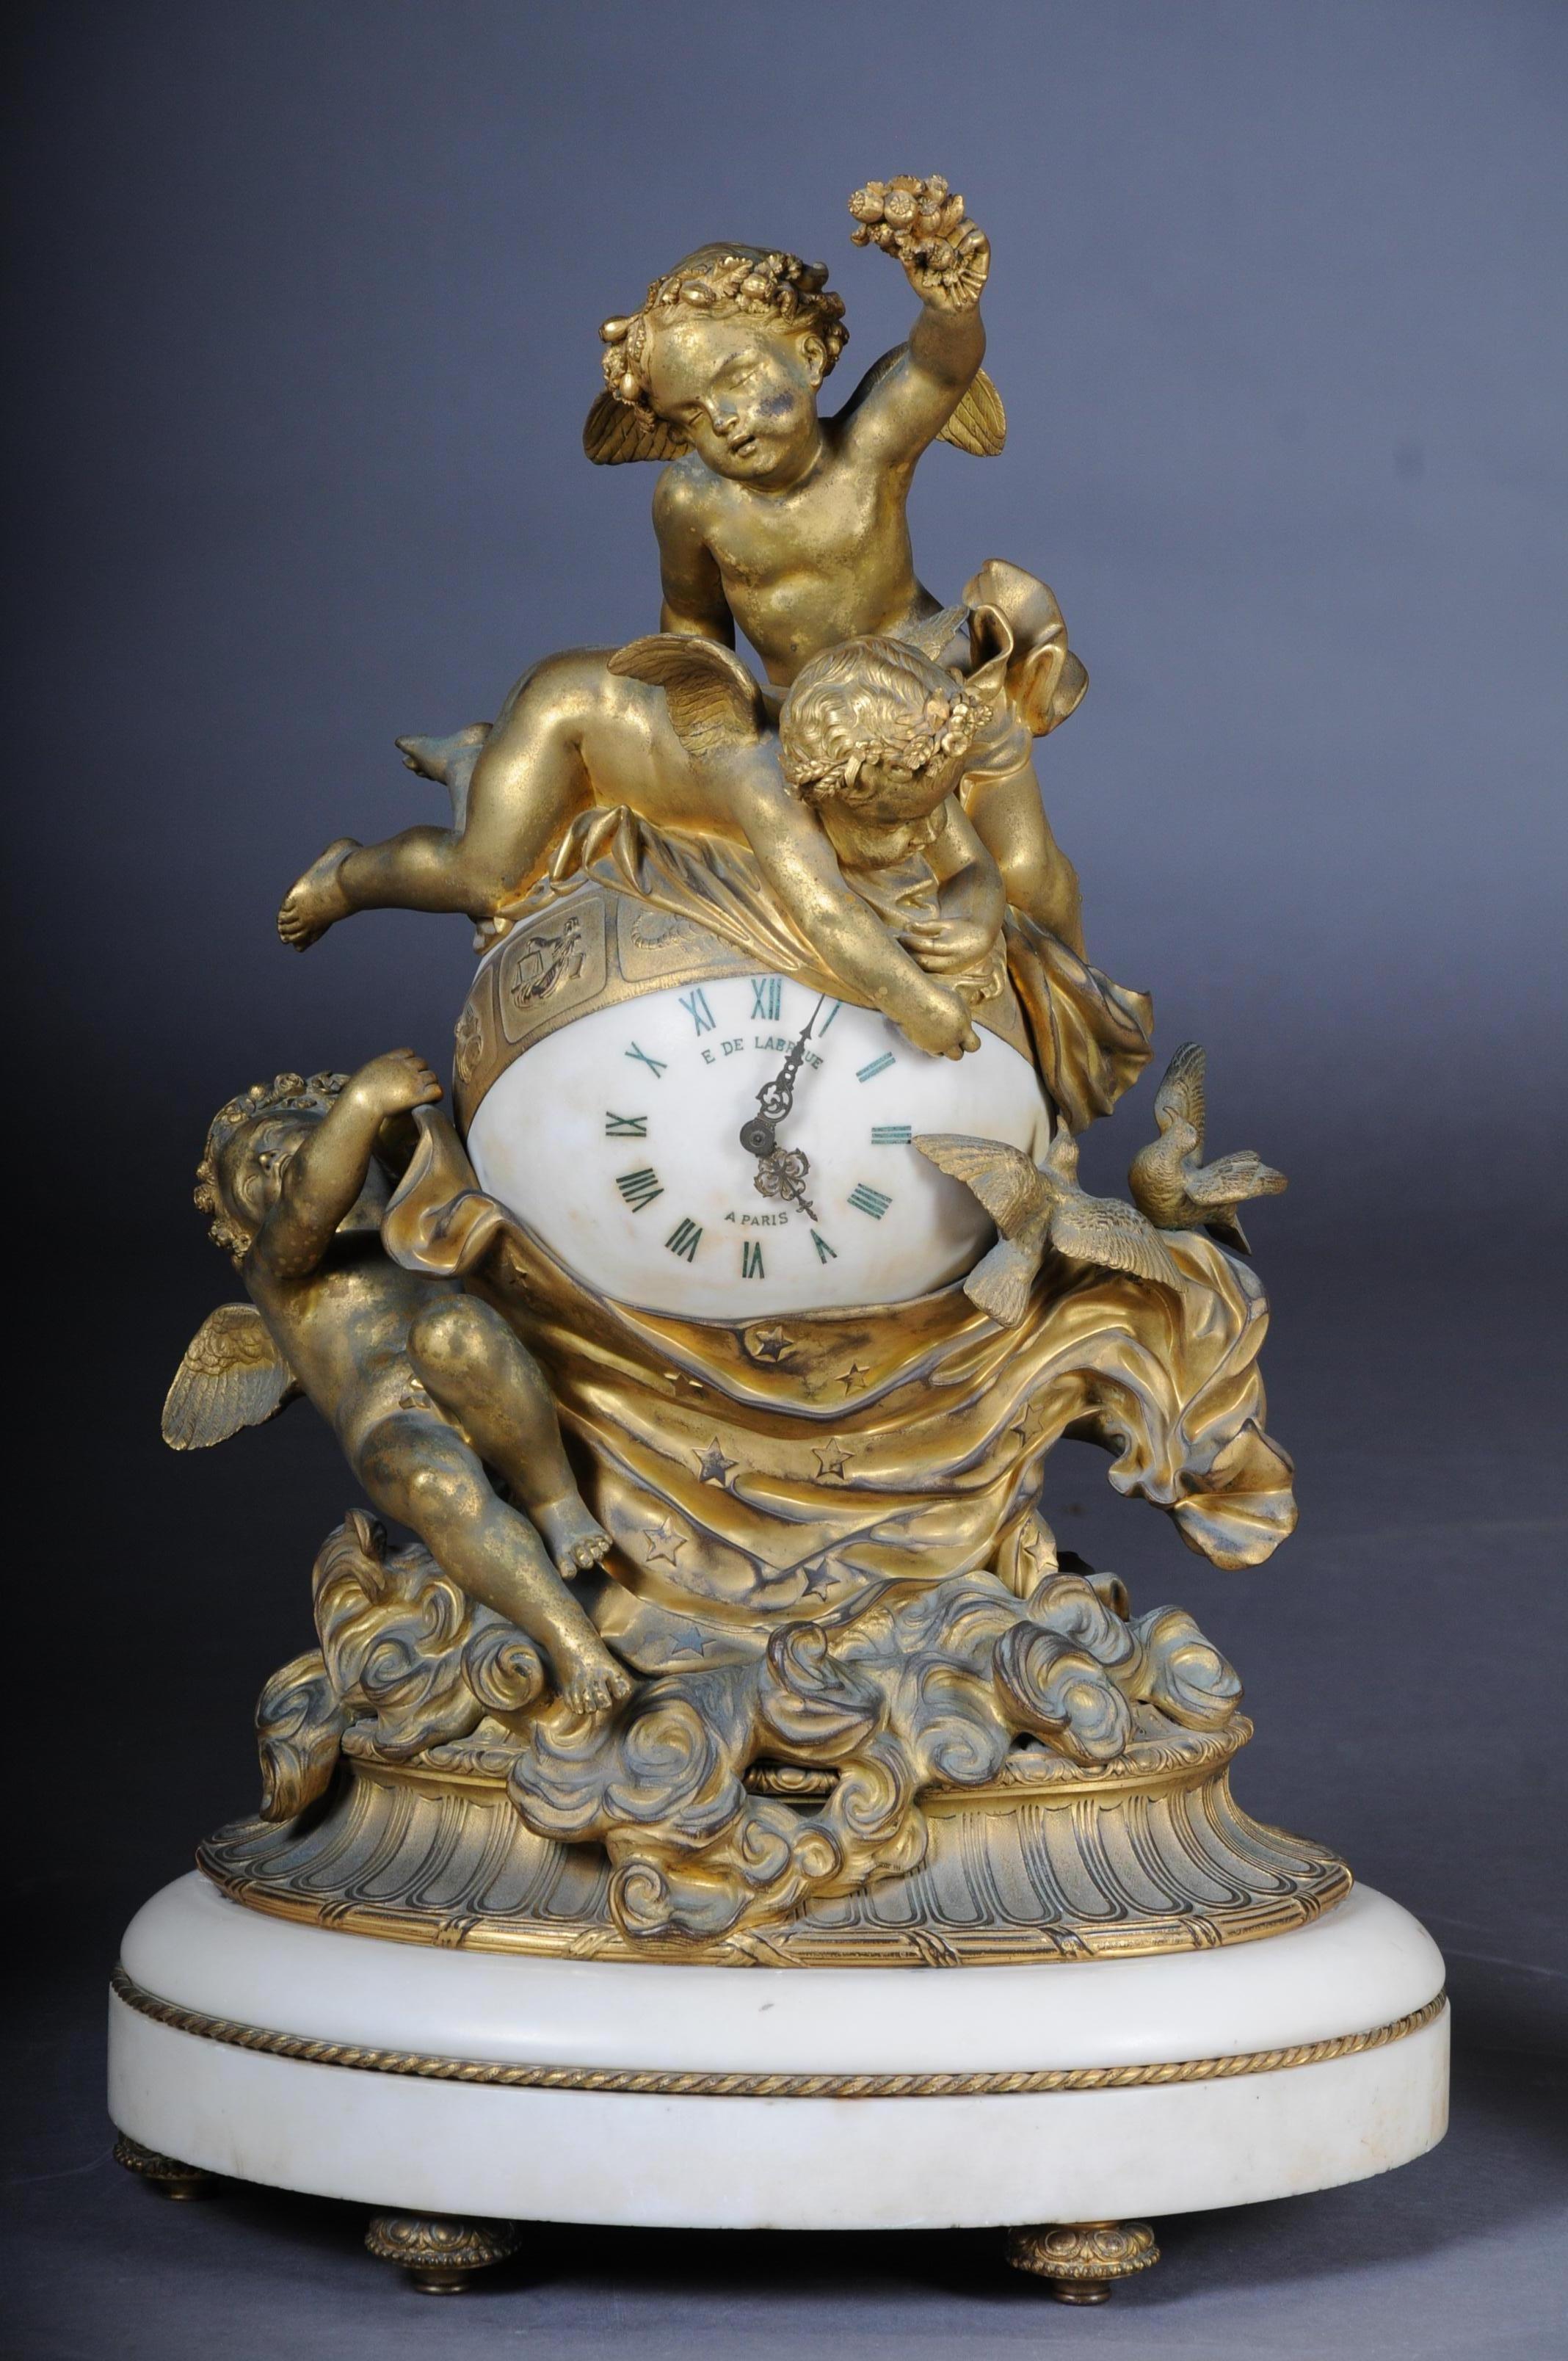 French gilt-bronze and carrara marble clock garniture by E.De. Labroue, Paris, circa 1890.

emblematic of the cloth of dusk being drawn over the earth, three putti and two doves raised on a cloudbank, the spherical clockcase signed E. DE. LABROUE.